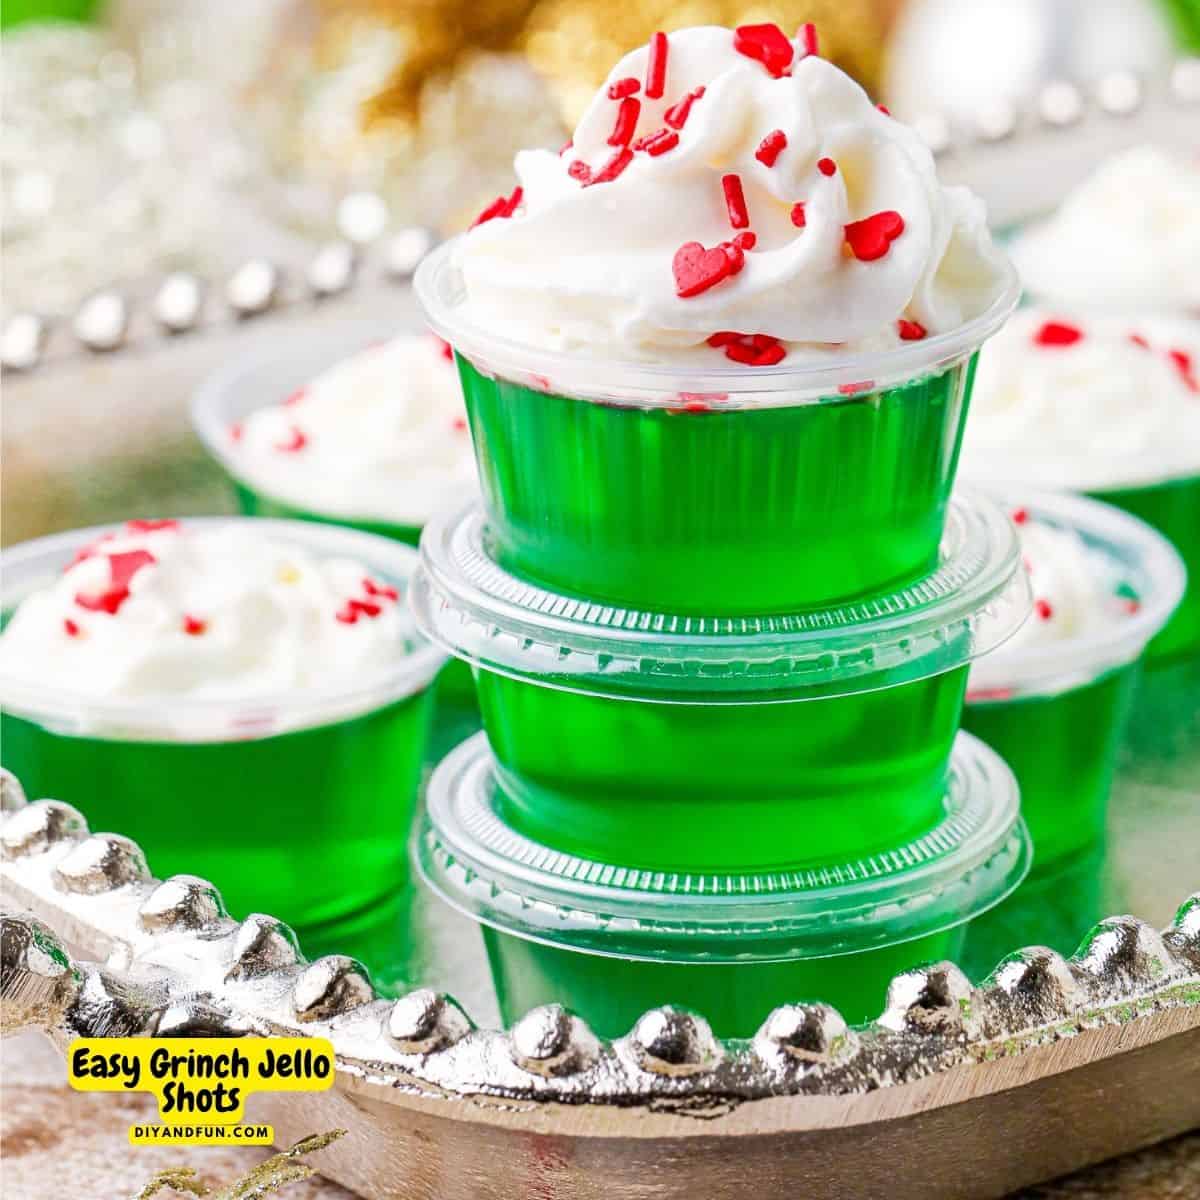 Easy Grinch Jello Shots Recipe, a simple green adult holiday Christmas dessert treat made with gelatin and optional alcohol. (video)